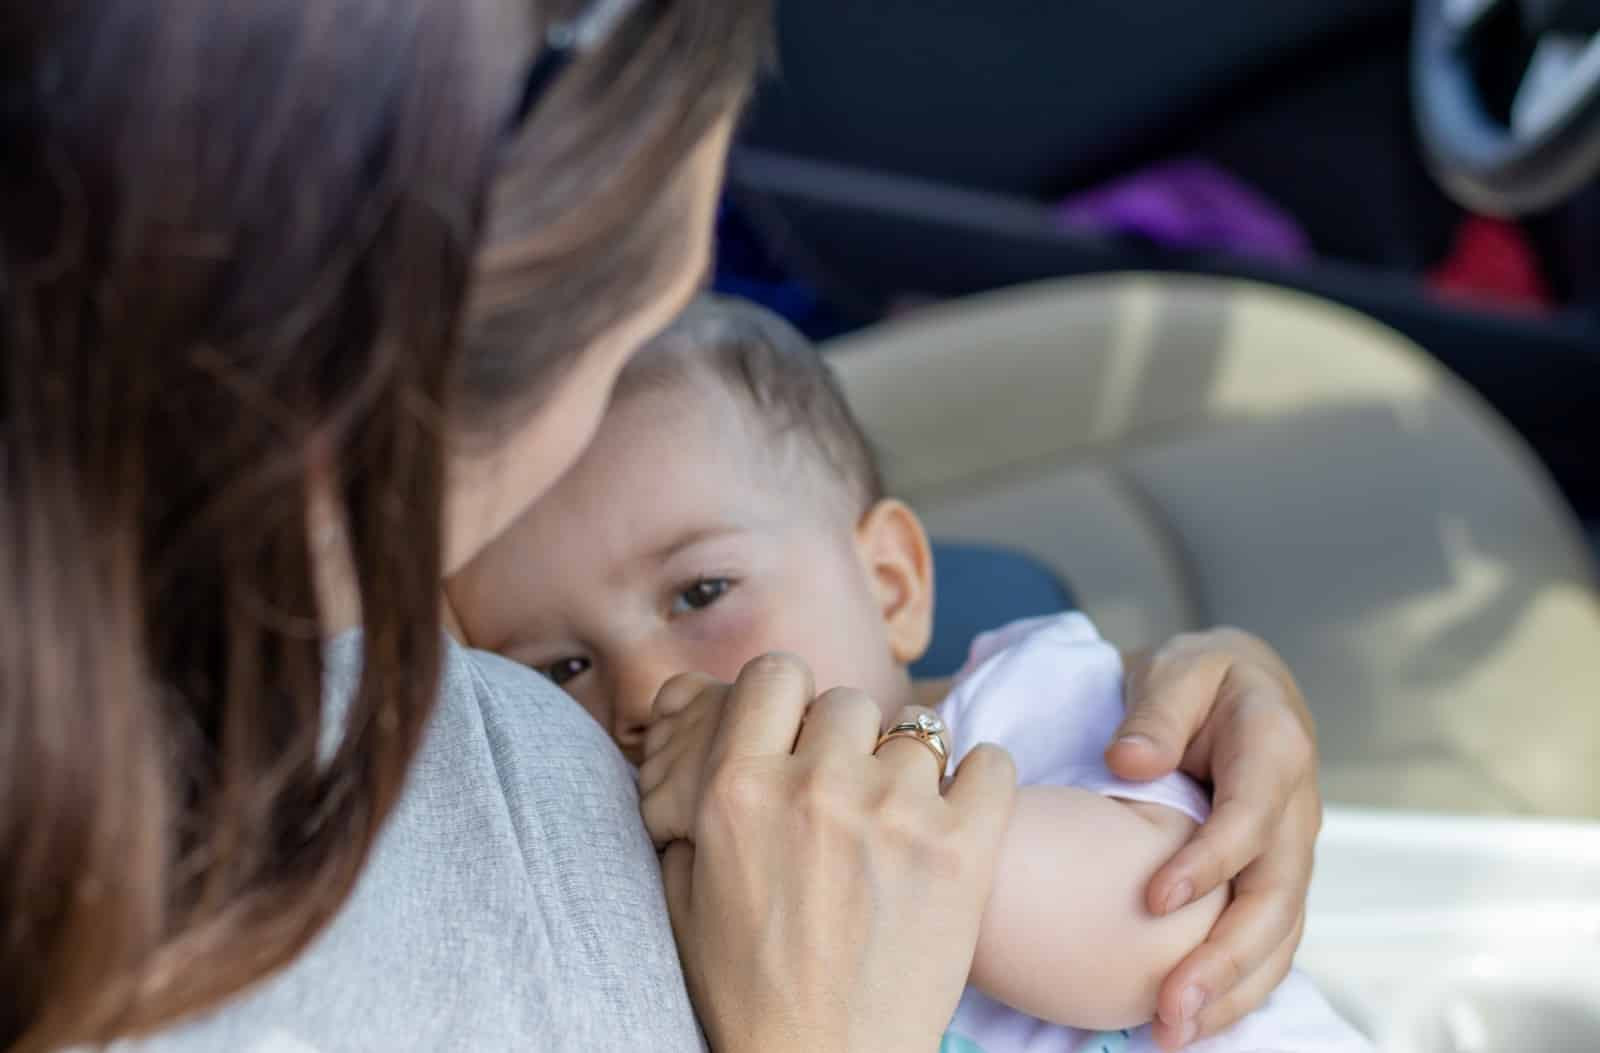 Image Credit: Shutterstock / Alexandra Morosanu <p><span>Feeding a child is natural and should be accepted in all spaces.</span></p>